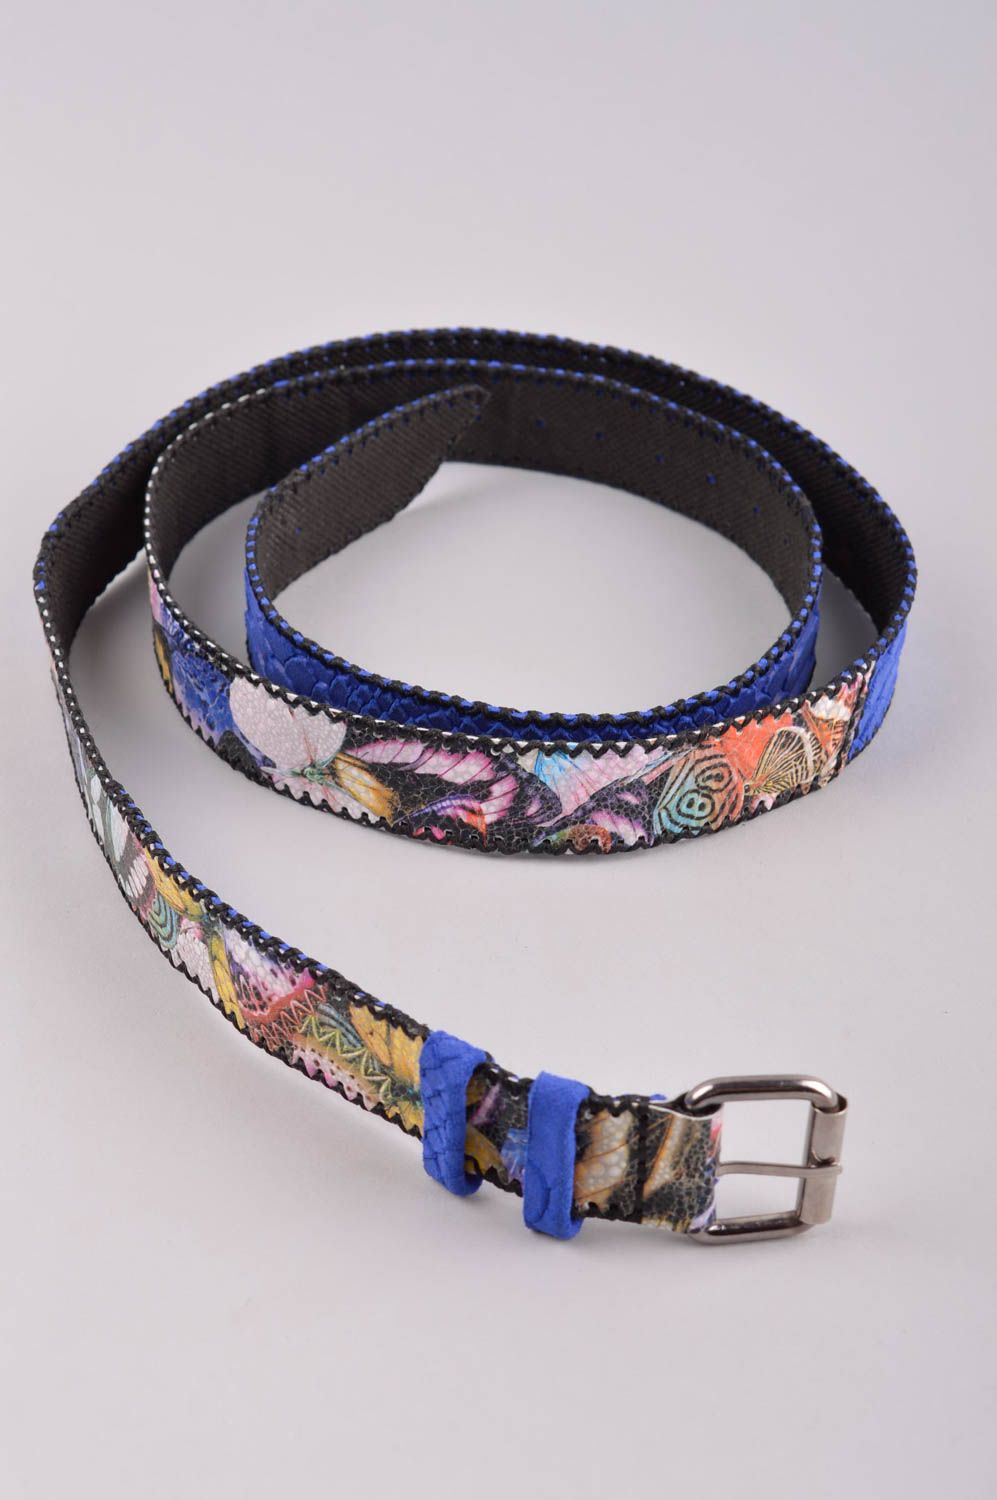 Stylish handmade leather belt leather goods fashion accessories for girls photo 4